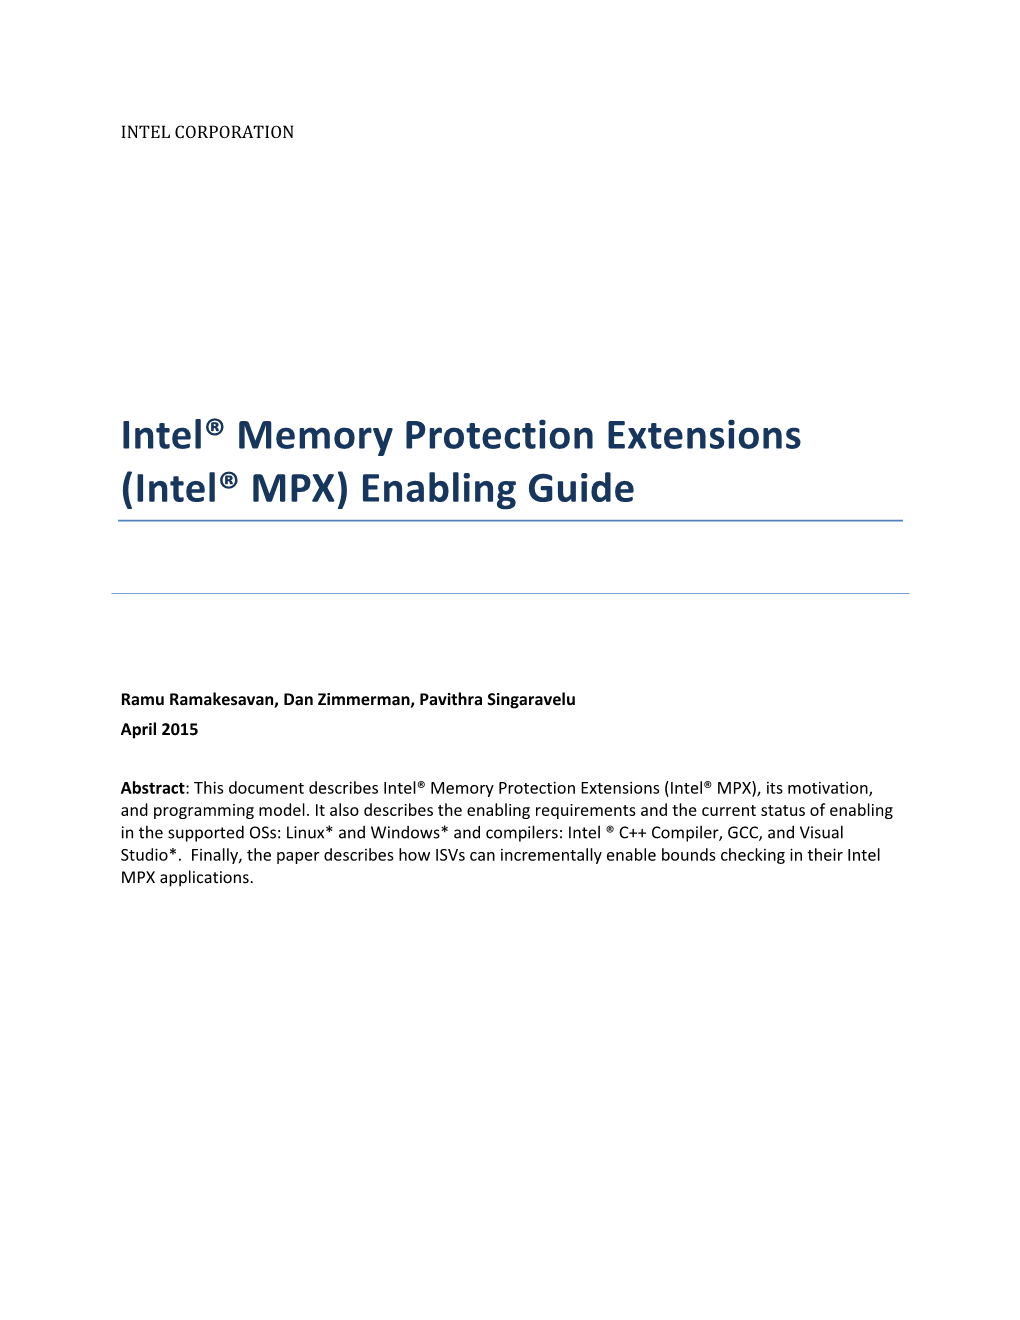 Intel® Memory Protection Extensions (Intel® MPX) Enabling Guide